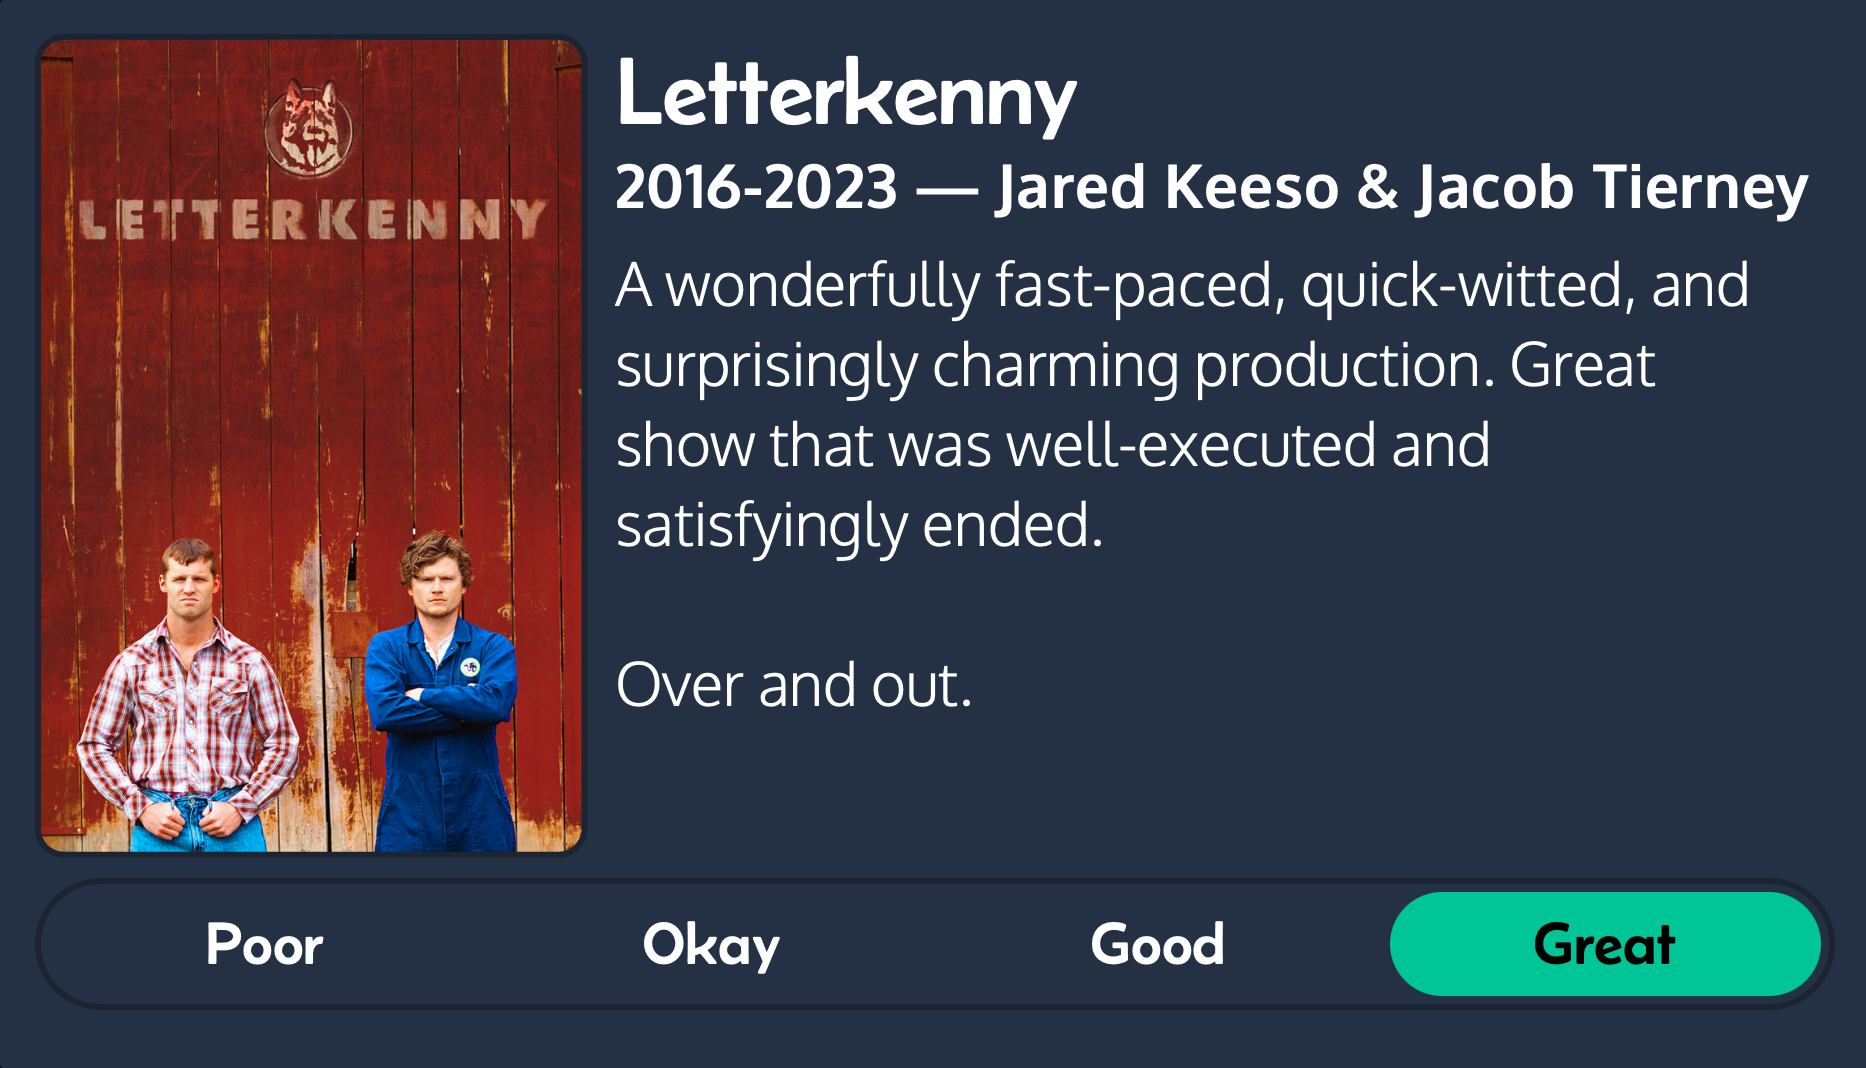 Two men stand arms crossed in front of a red wall with &ldquo;LETTERKENNY&rdquo; written on it. Text: &ldquo;Letterkenny 2016-2023 — Jared Keeso &amp; Jacob Tierney A wonderfully fast-paced, quick-witted, and surprisingly charming production. Great show that was well-executed and satisfyingly ended. Over and out.&rdquo; Buttons below read &ldquo;Poor,&rdquo; &ldquo;Okay,&rdquo; and &ldquo;Good,&rdquo; with &ldquo;Great&rdquo; selected.